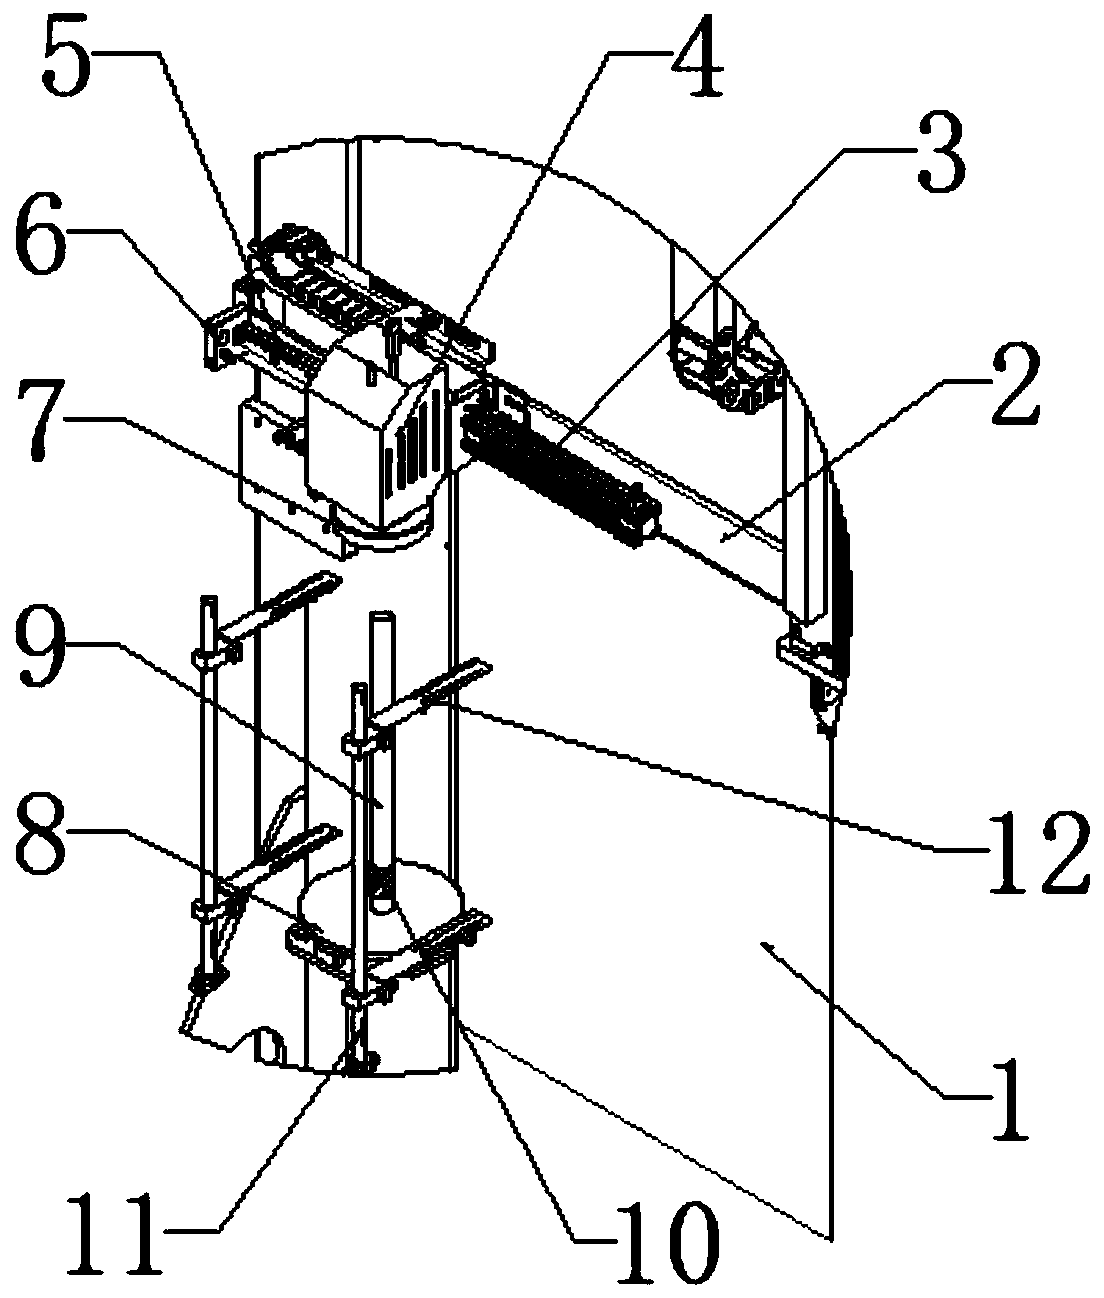 2D camera photographing mechanism used in match with a mechanical arm